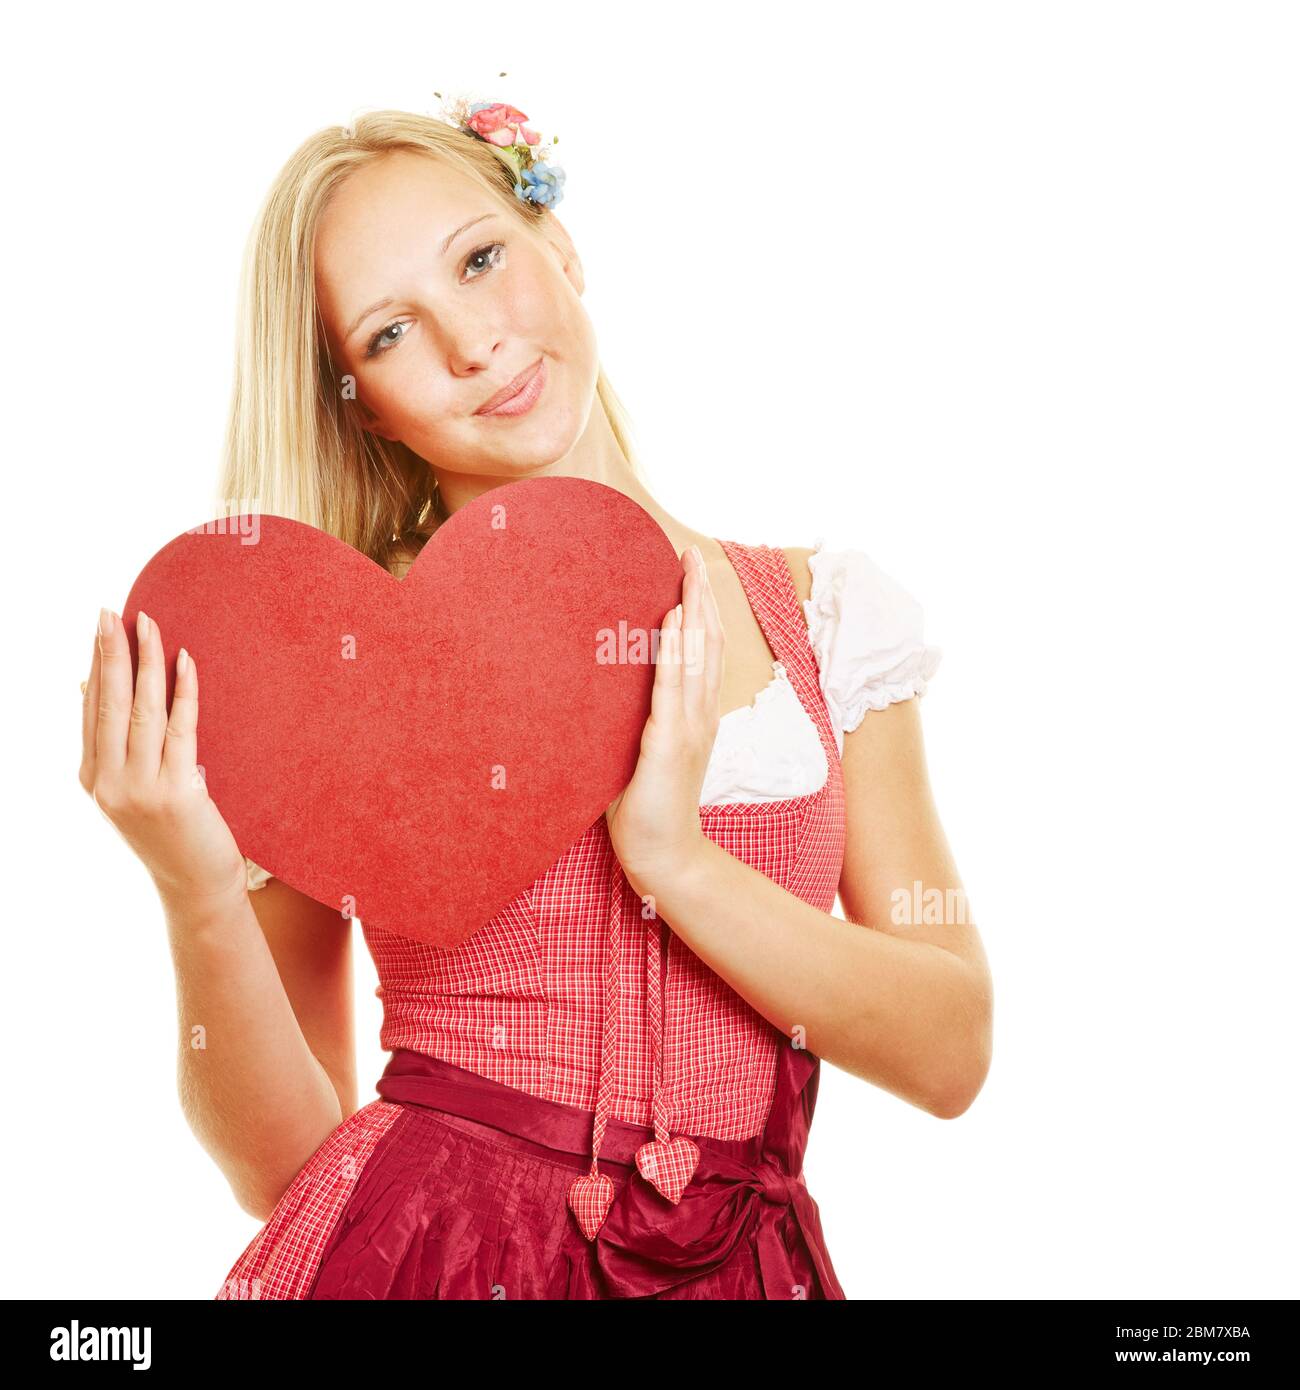 Young smiling woman in dirndl with a big red heart Stock Photo